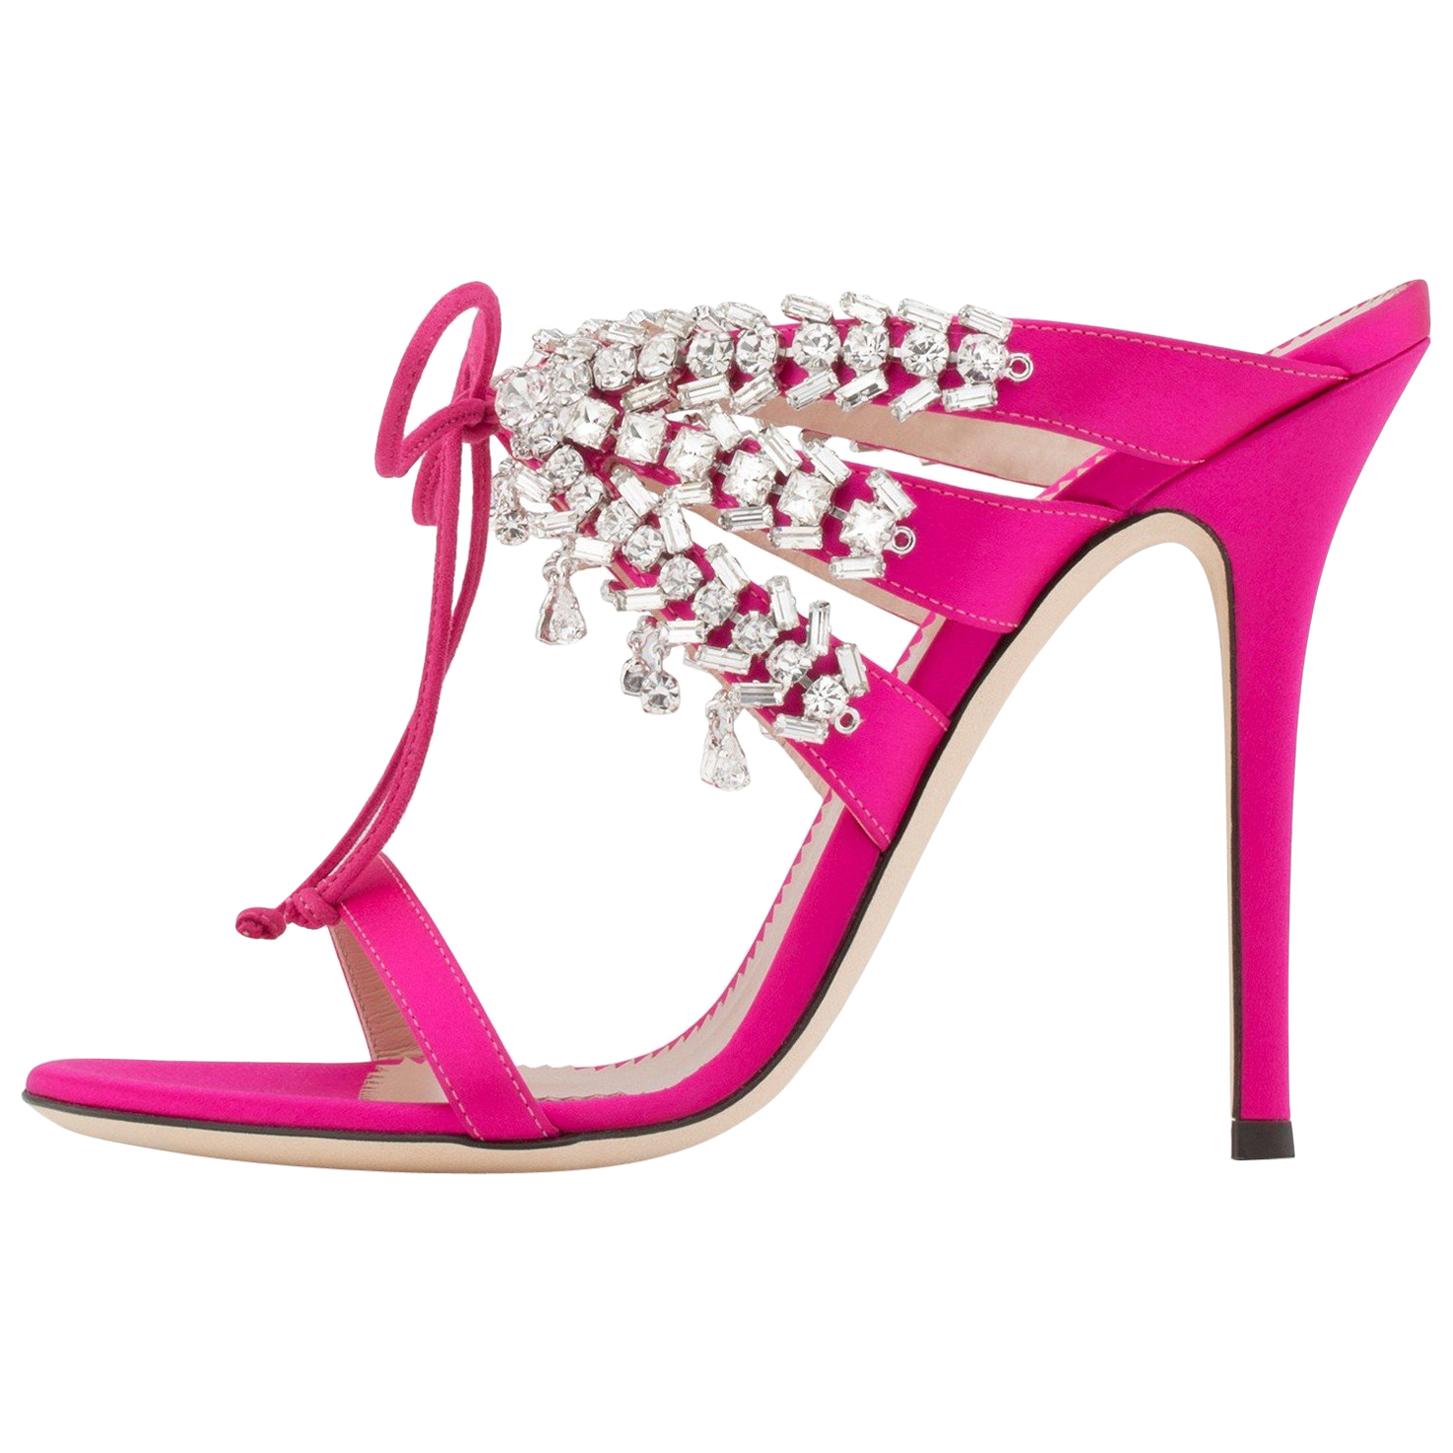 Giuseppe Zanotti NEW Pink Crystal Slide in Mules Sandals Heels in Box